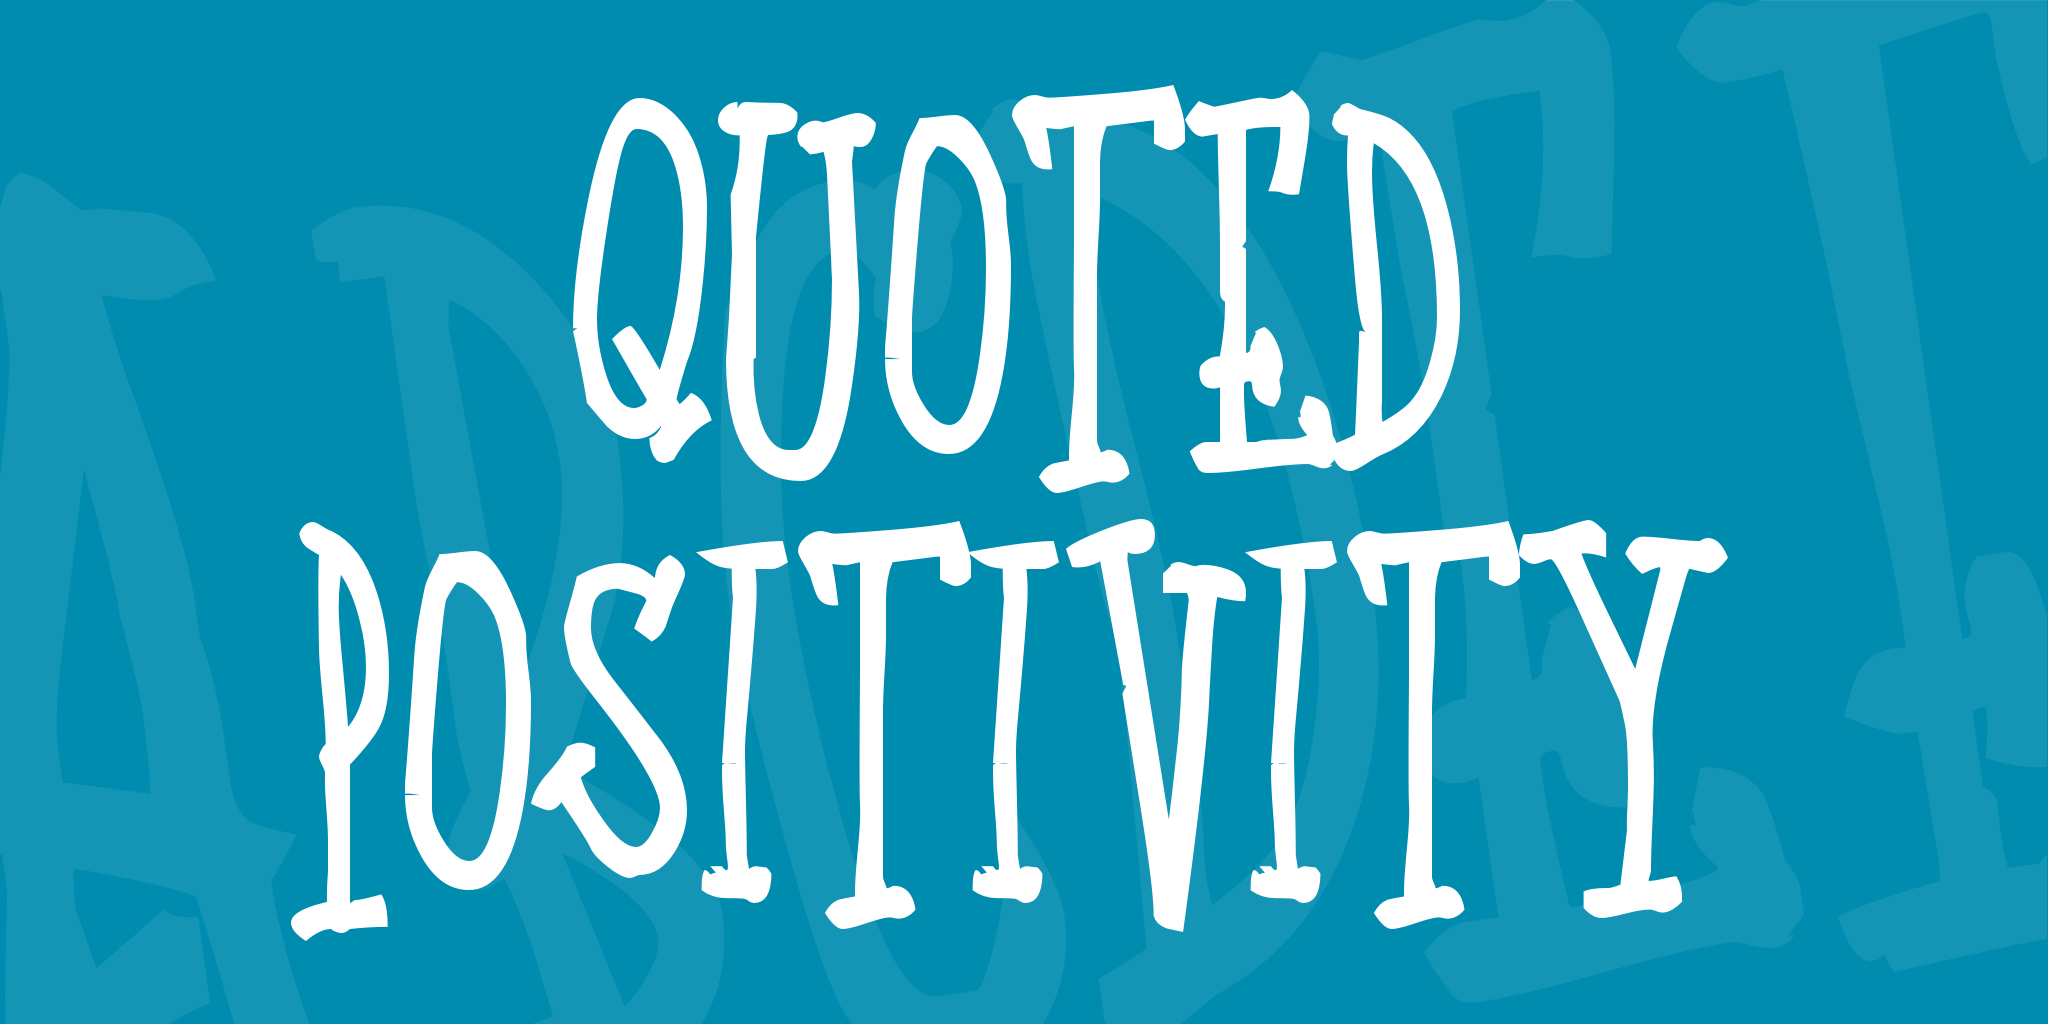 Quoted Positivity